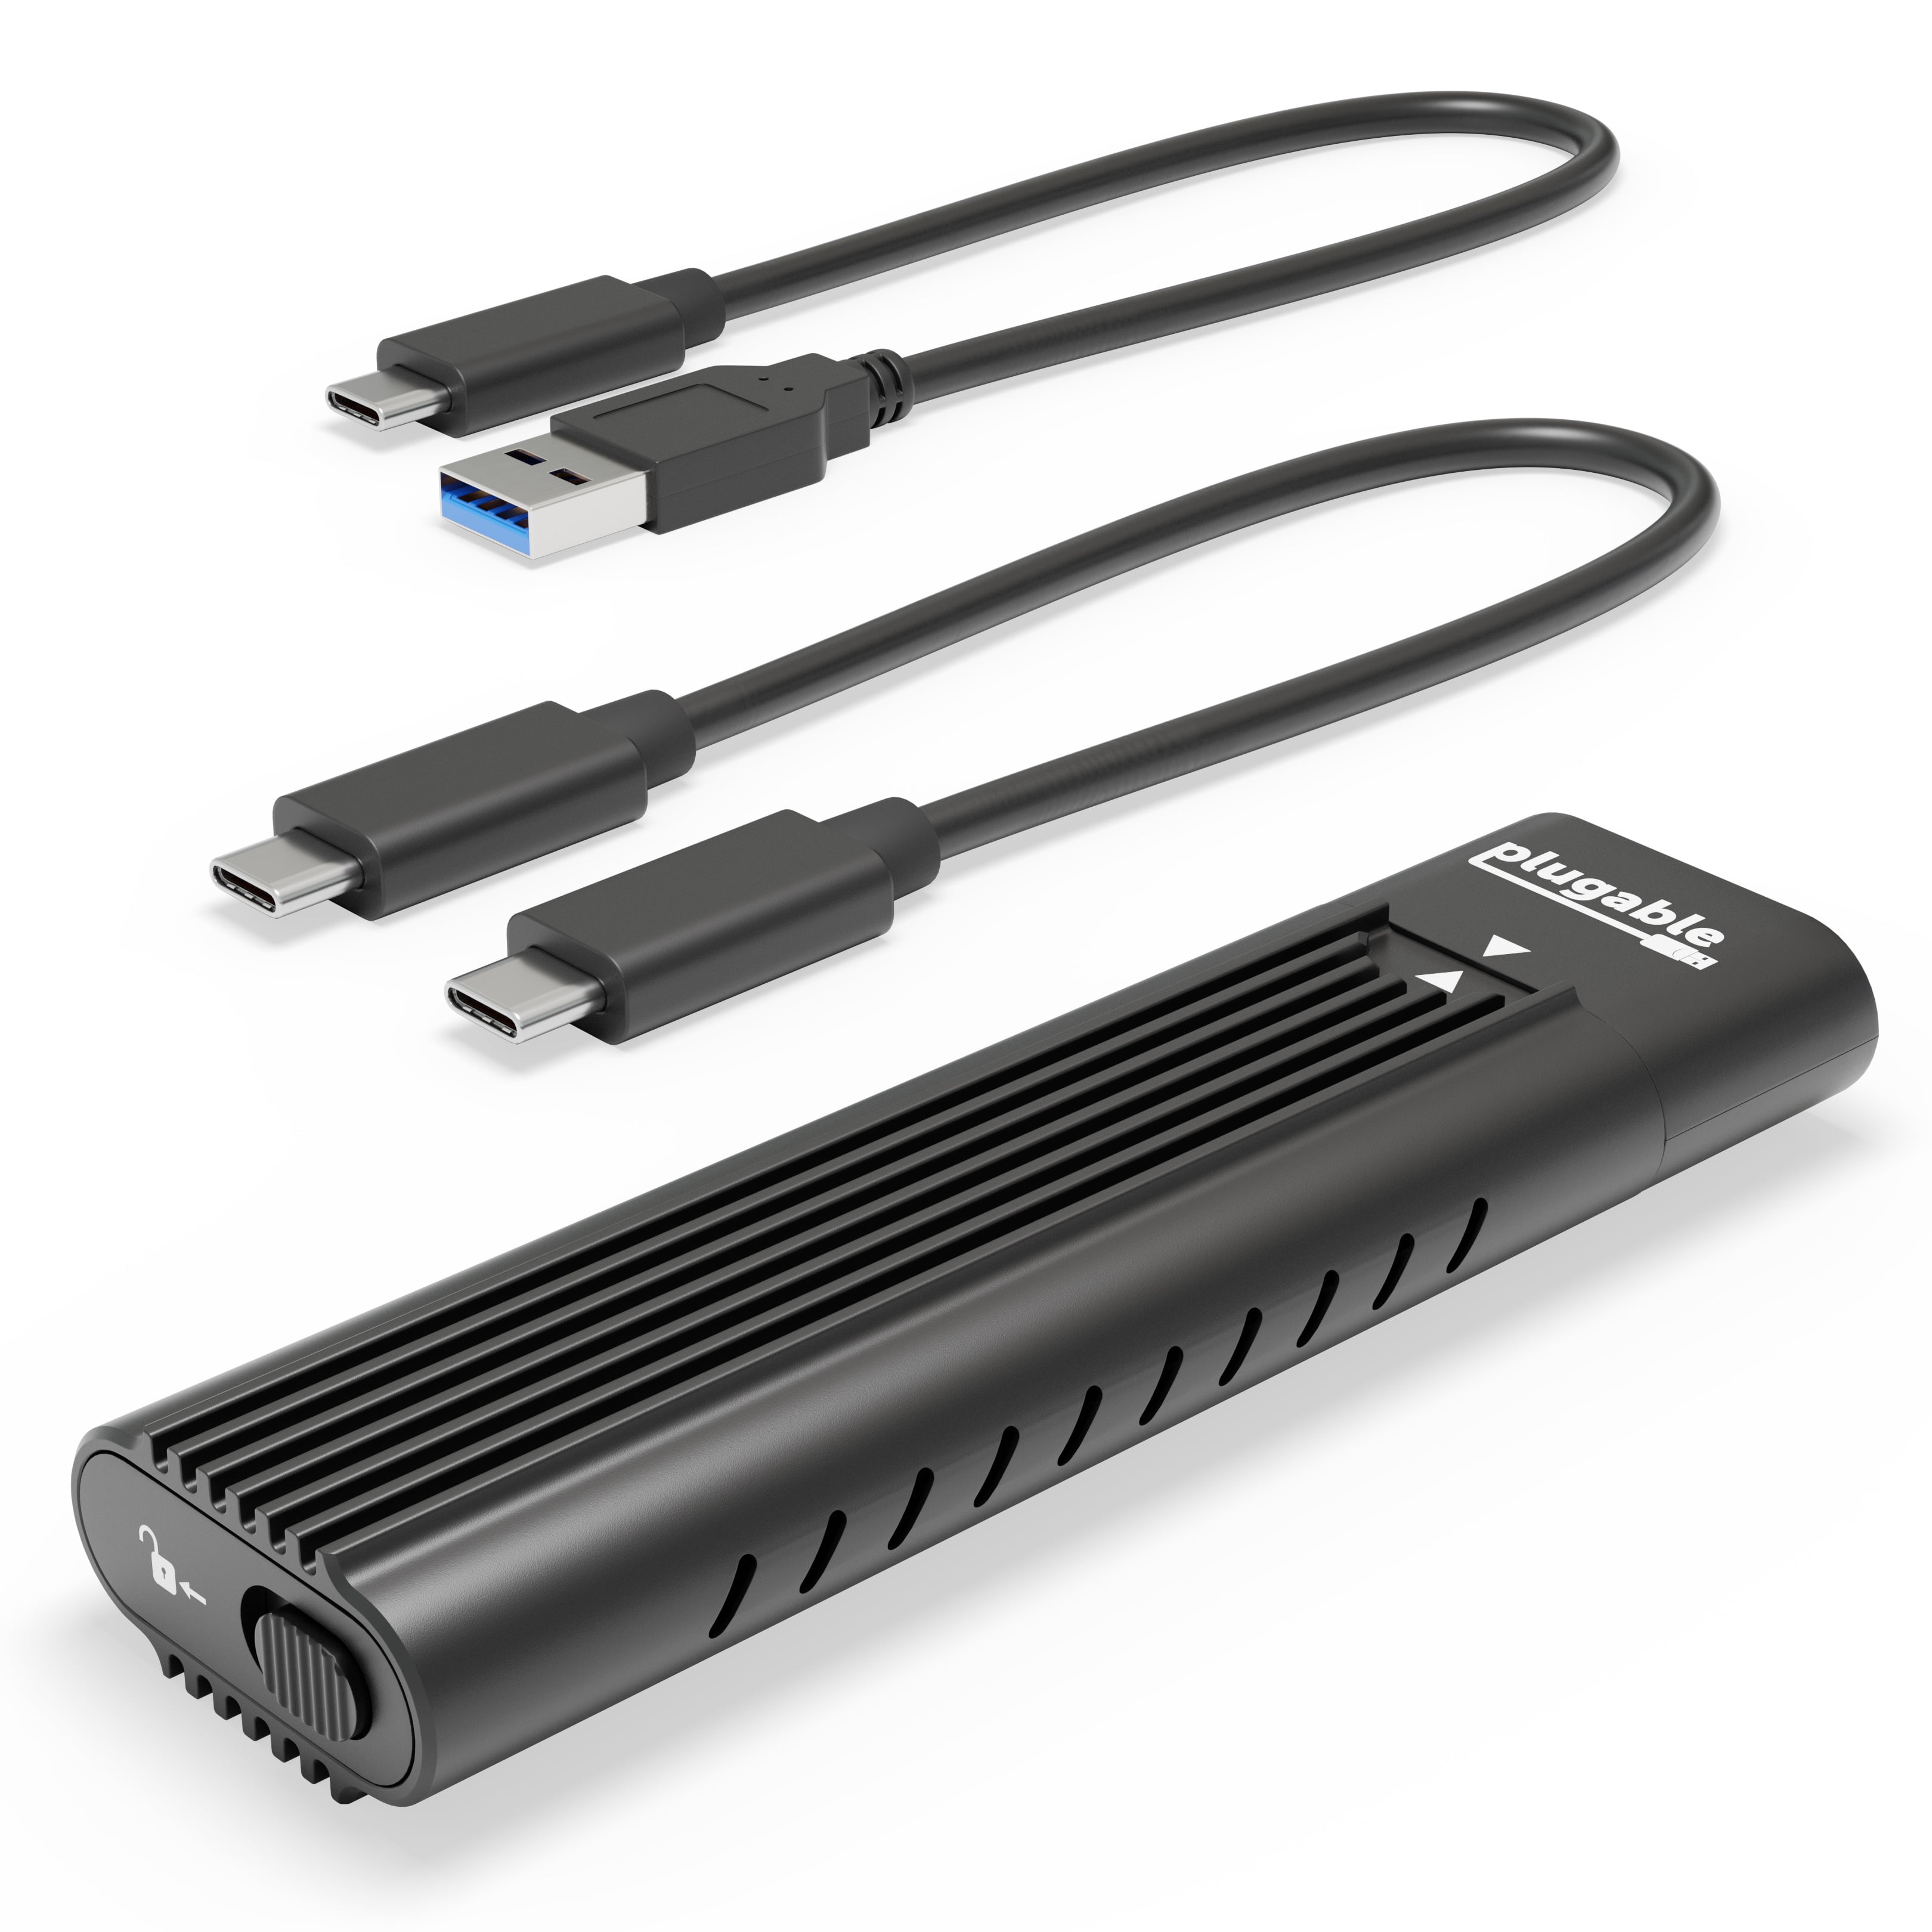 Plugable USB C to M.2 NVMe Tool-free Enclosure USB C and Thunderbolt 3 Compatible up to 3.1 Gen 2 Speeds (10Gbps). Adapter Includes USB-C and USB 3.0 Cables (Supports M.2 NVMe